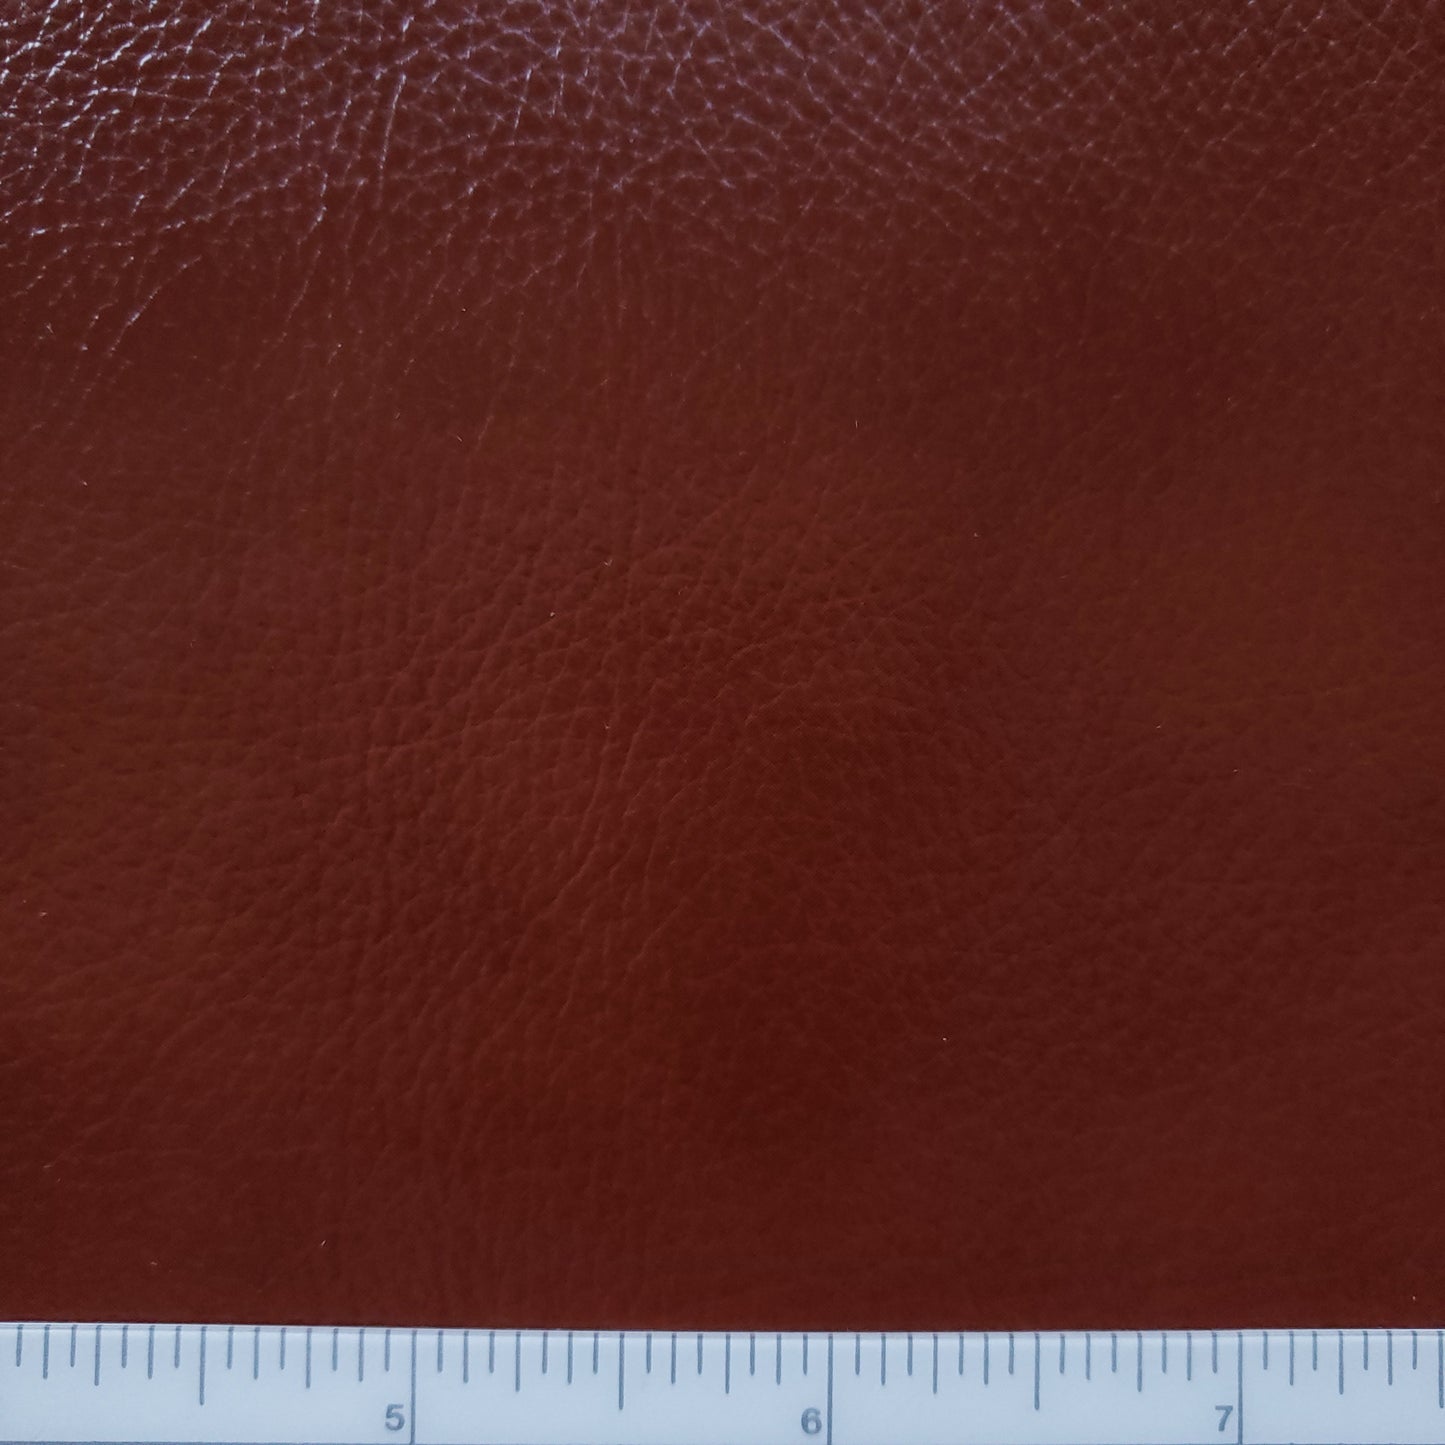 Rusted Gloss Microfiber Faux Leather